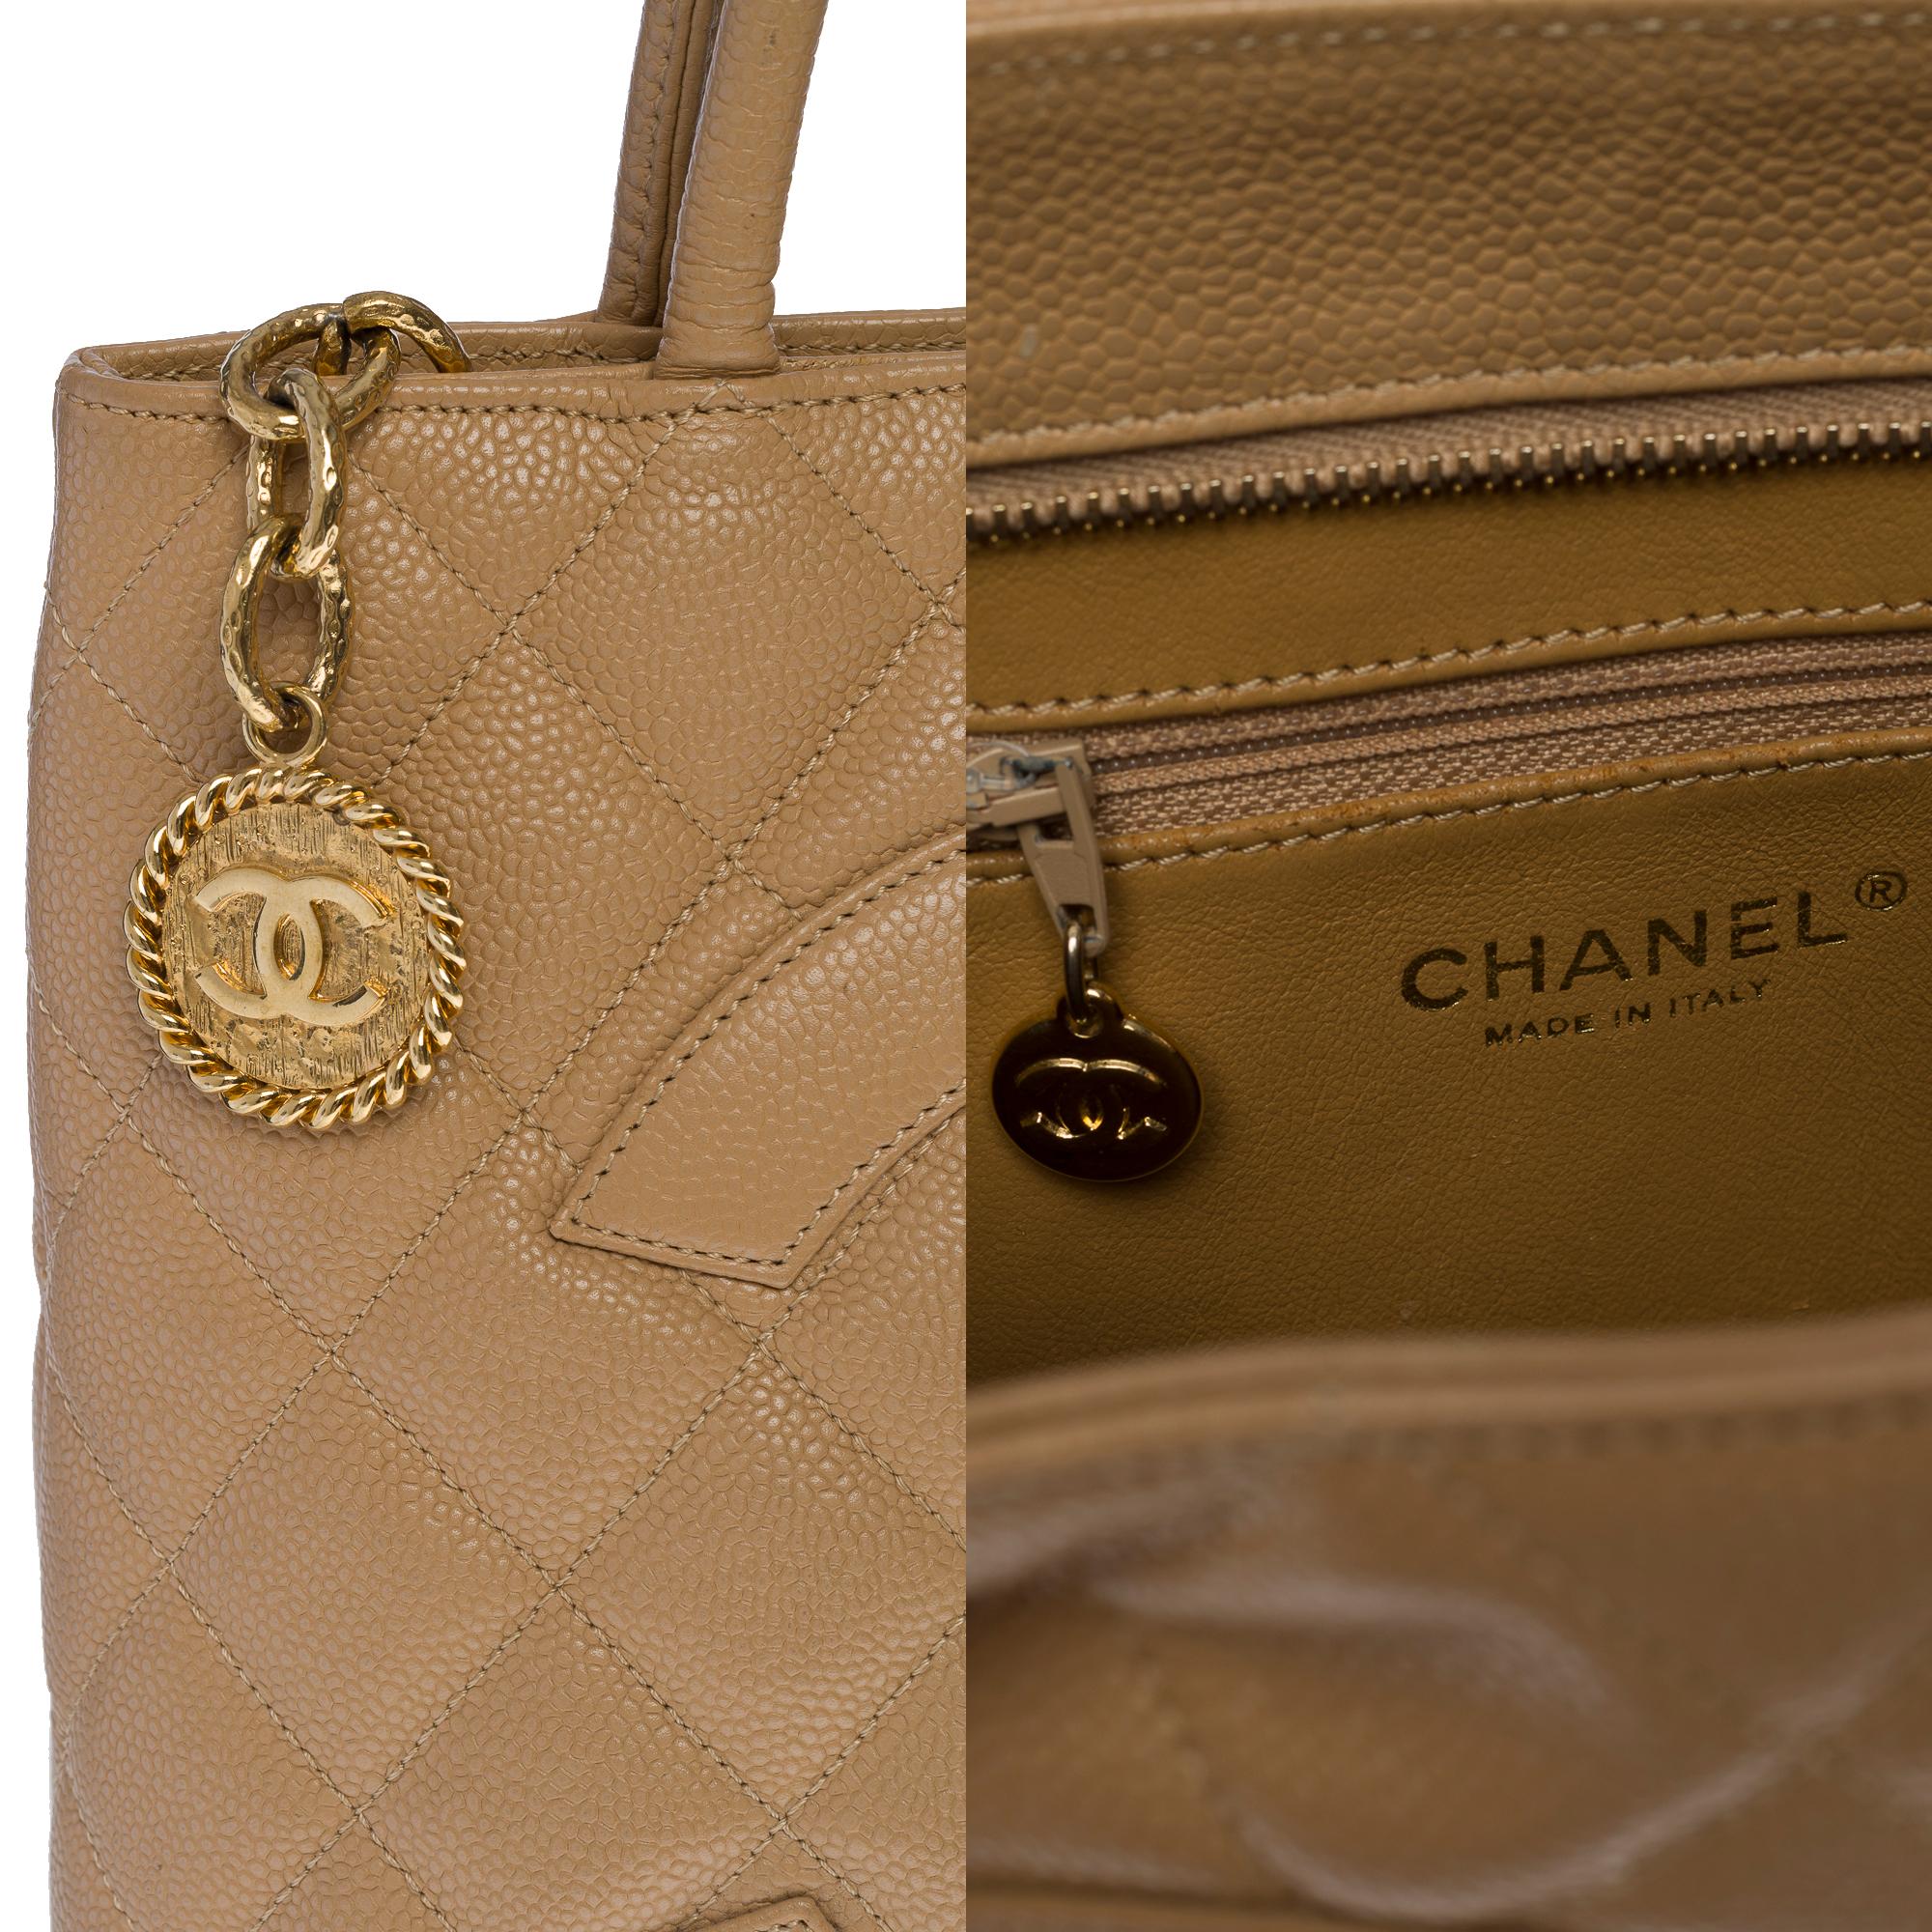  Chanel Médaillon Tote bag in beige caviar leather, GHW 1